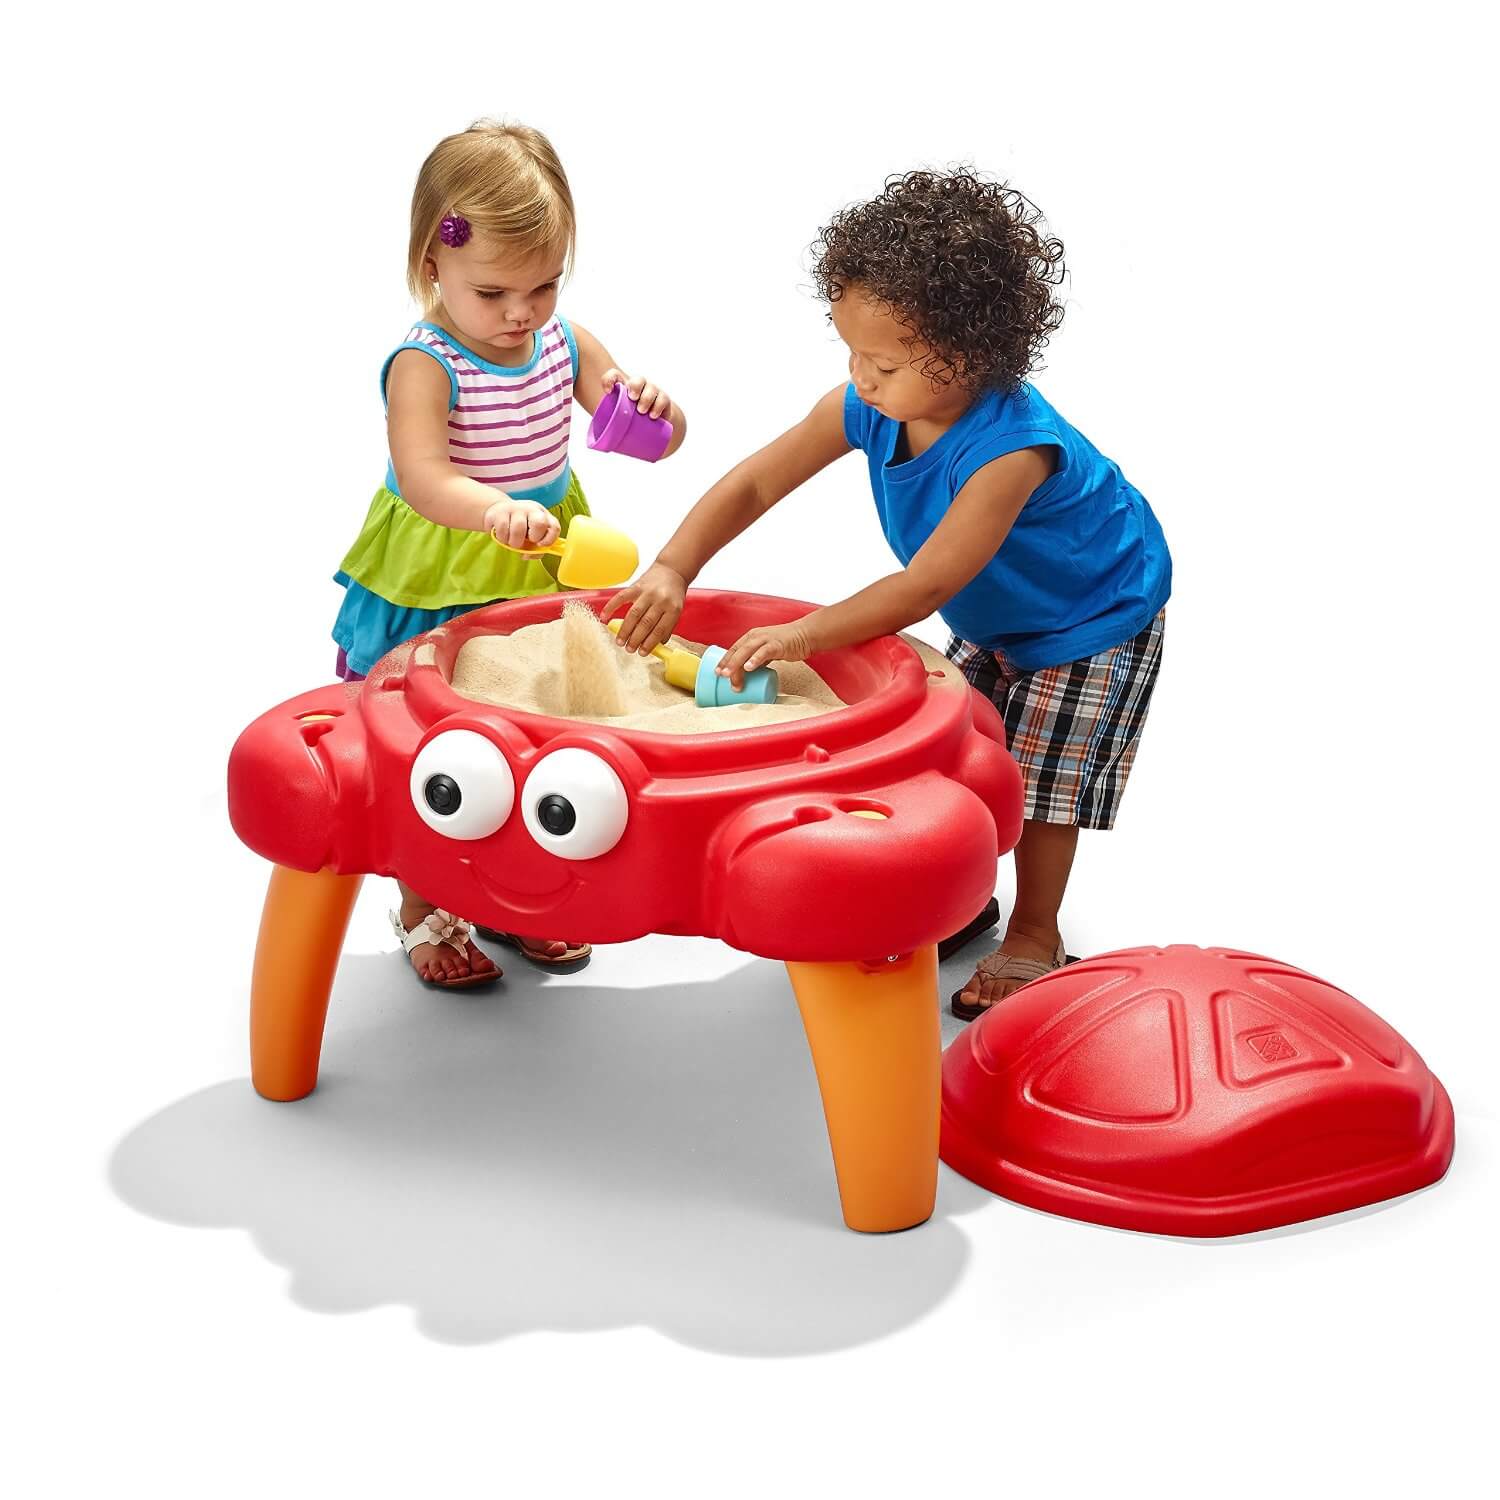 outdoor toys for one year old